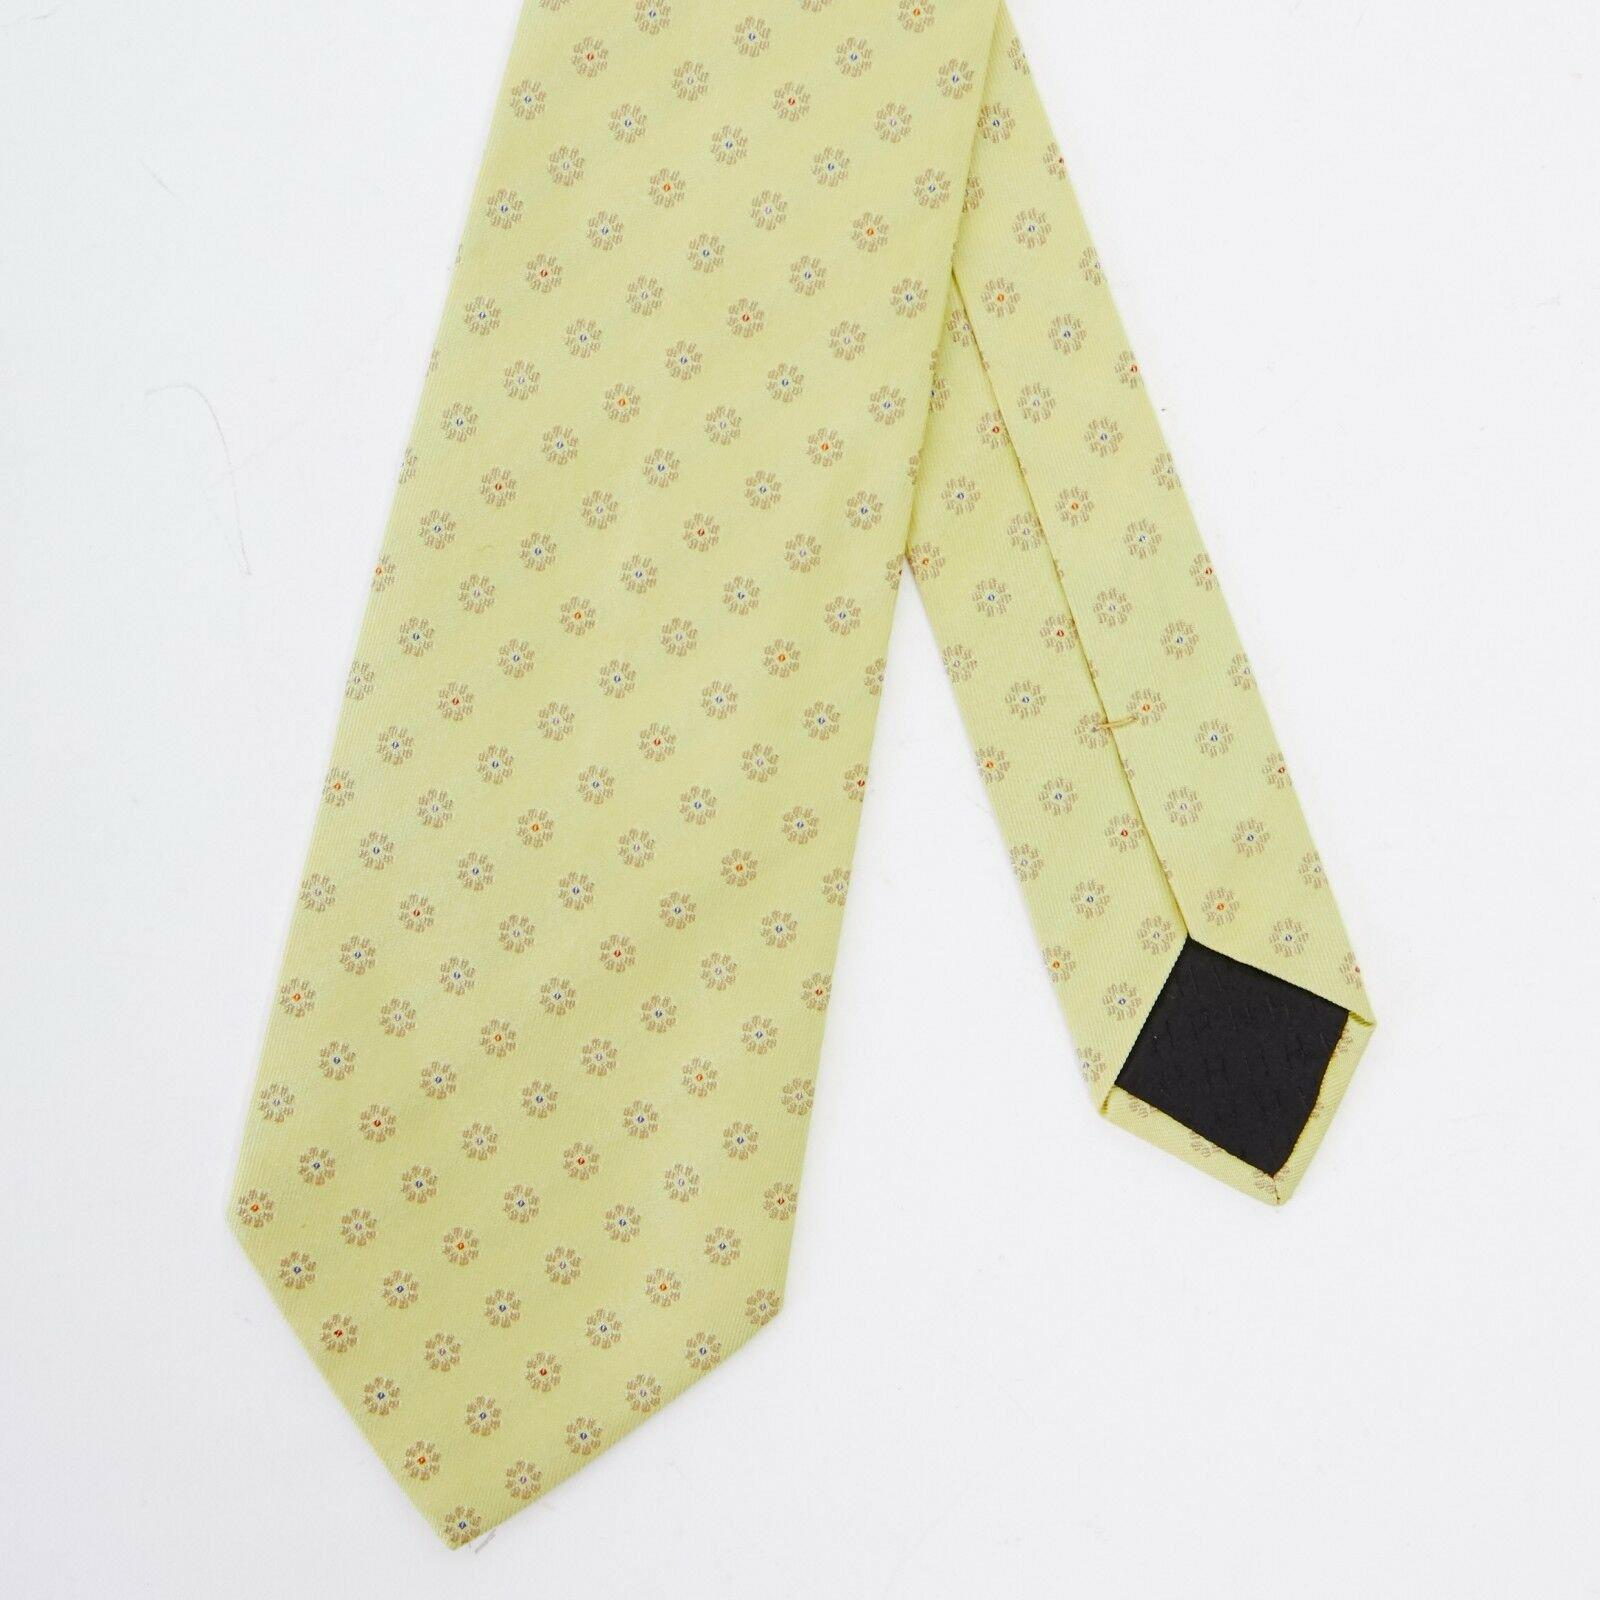 HERMES Heavy Silk light yellow multicolour flower dot pattern classic neck tie 
Reference: LACG/A00193 
Brand: Hermes 
Material: Silk 
Color: Yellow 
Pattern: Floral 
Extra Detail: Heavy Silk Series. 100% silk. Heavy silk. Light egg yolk yellow